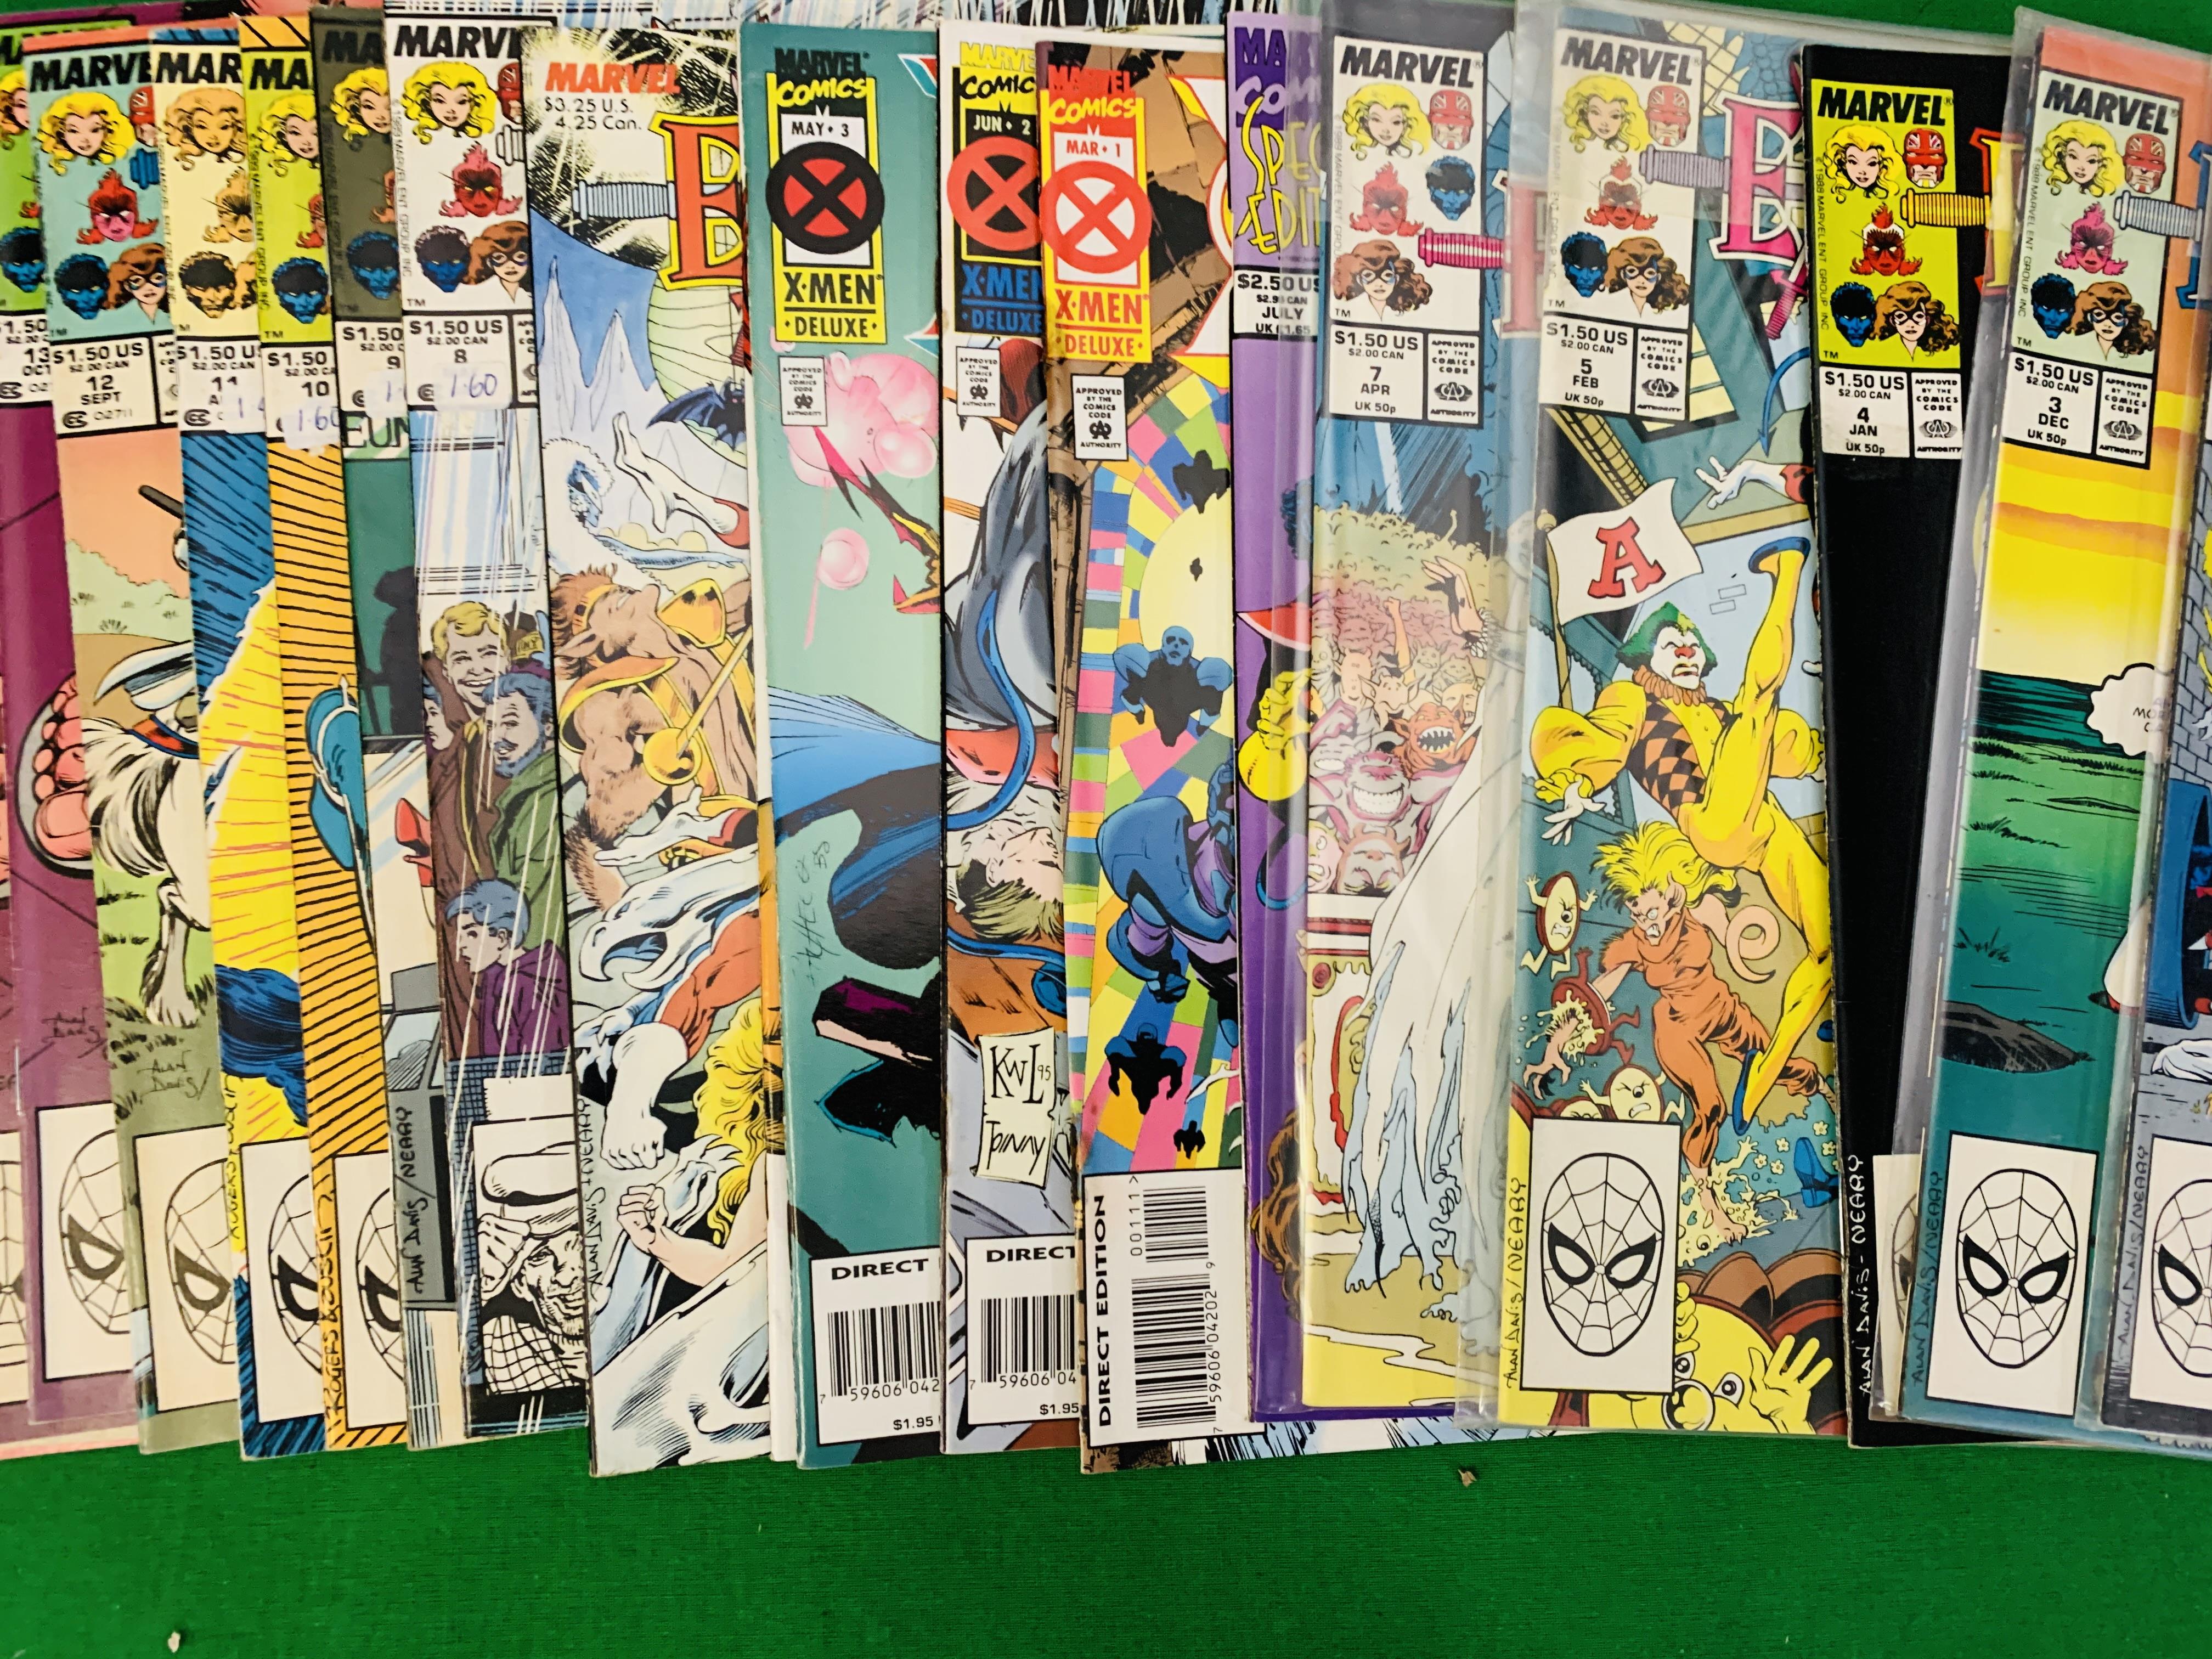 MARVEL COMICS EXCALIBUR NO. 1 - 125 FROM 1988. MISSING NO. - Image 4 of 21